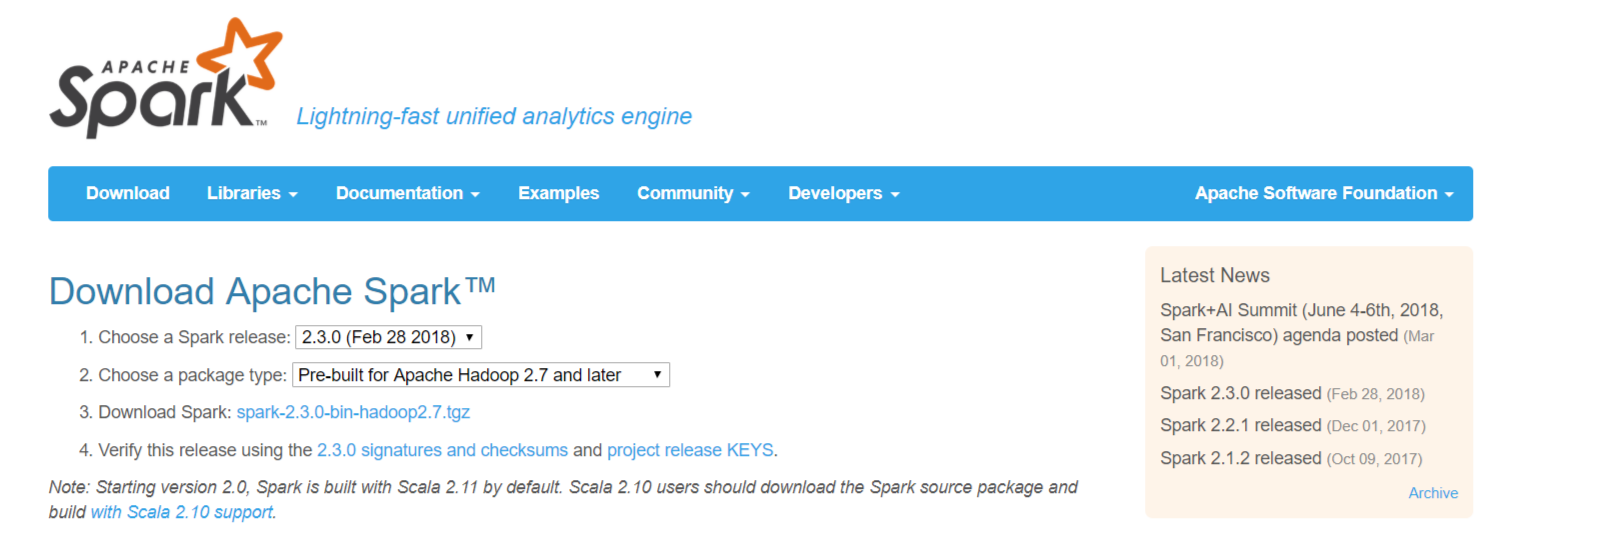 image from Apache Spark on Windows